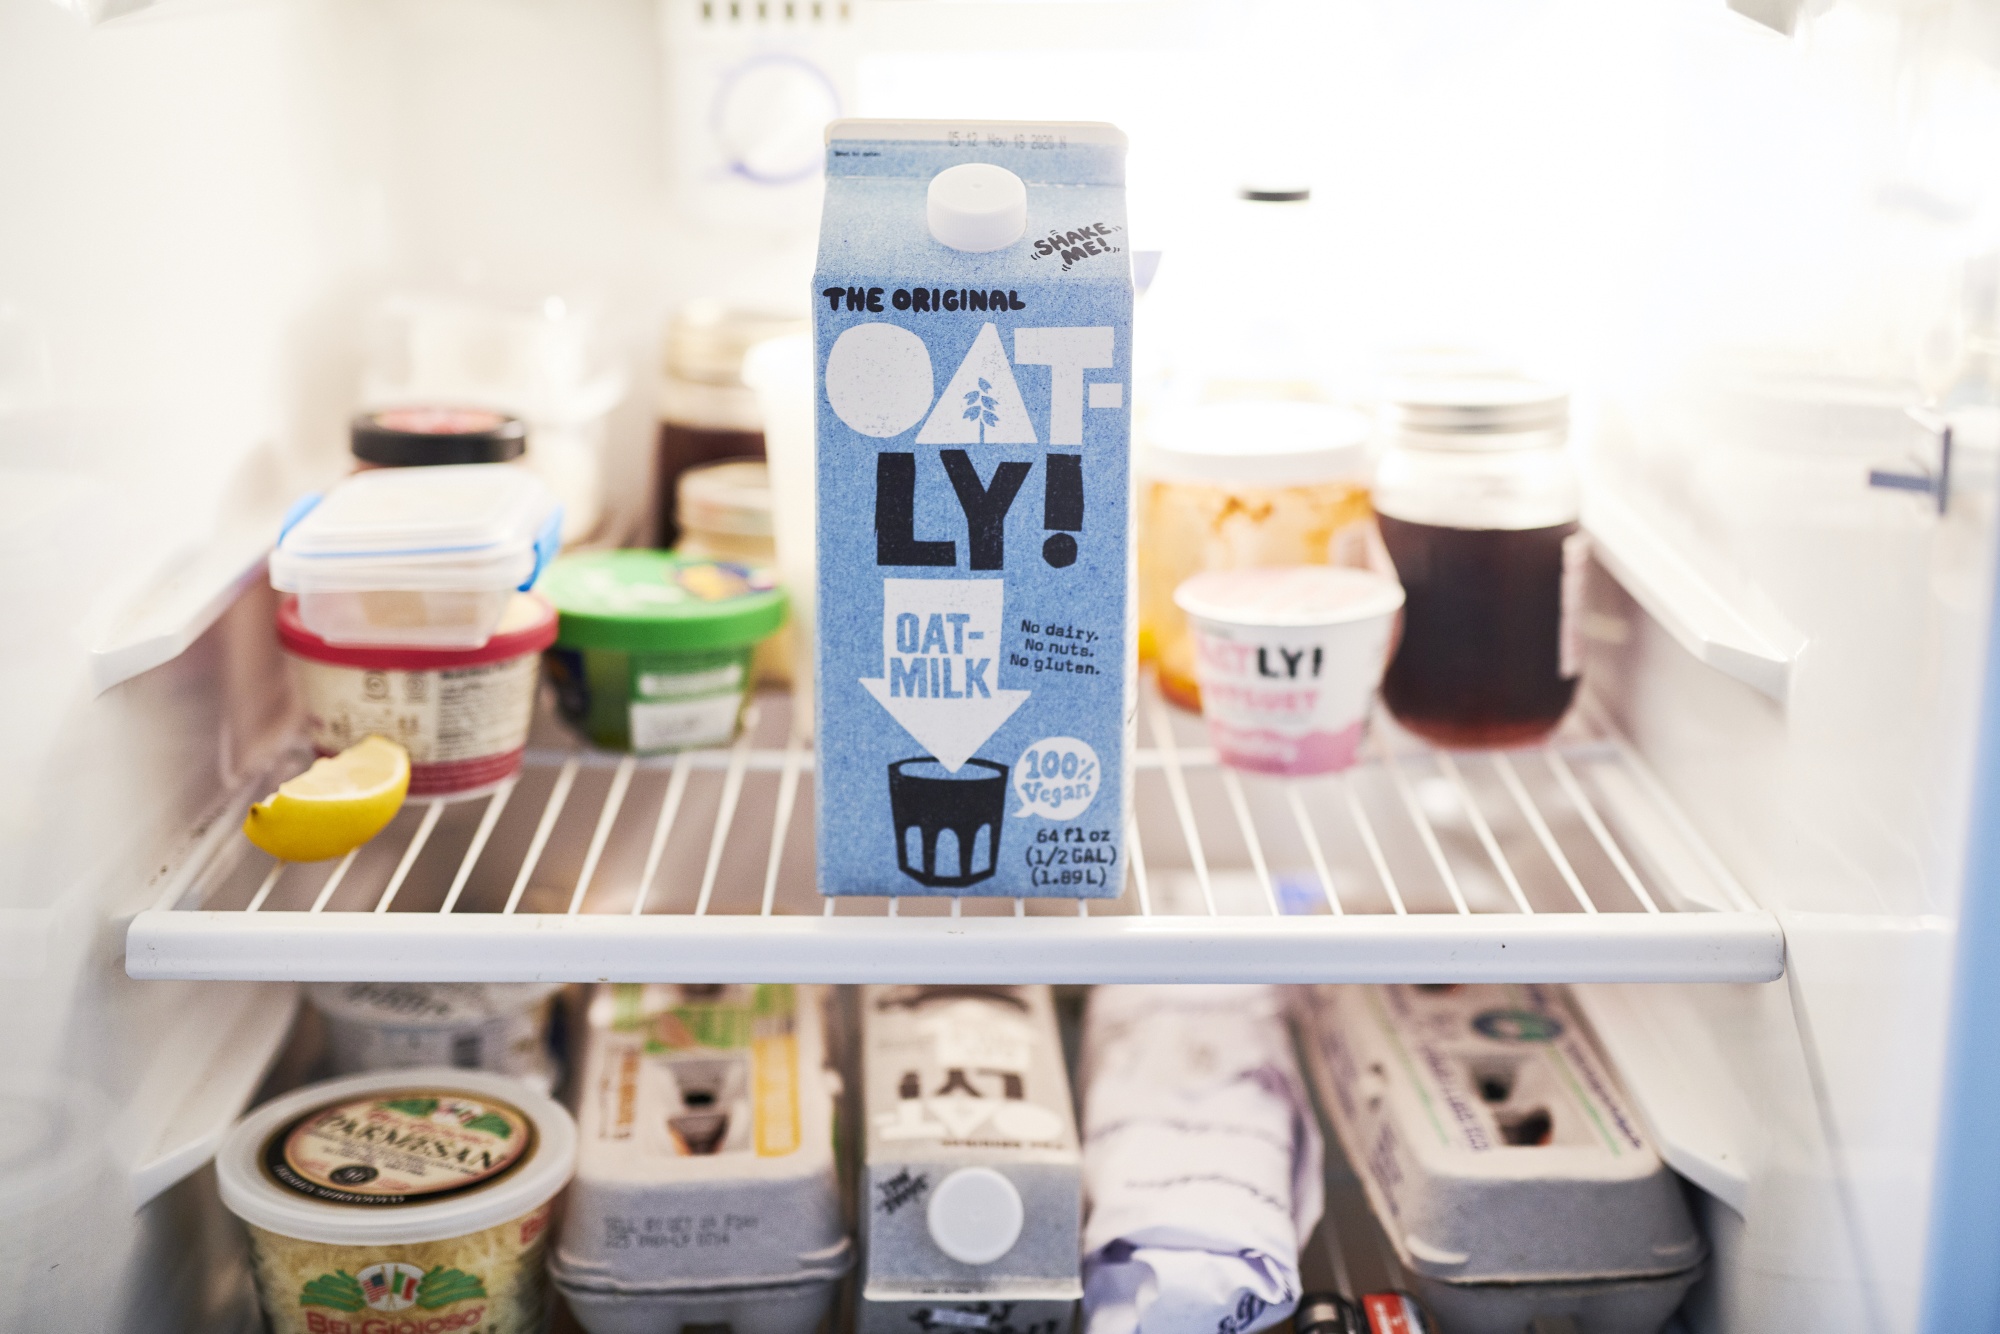 Case Study, How Oatly built 16 global websites in 2 months